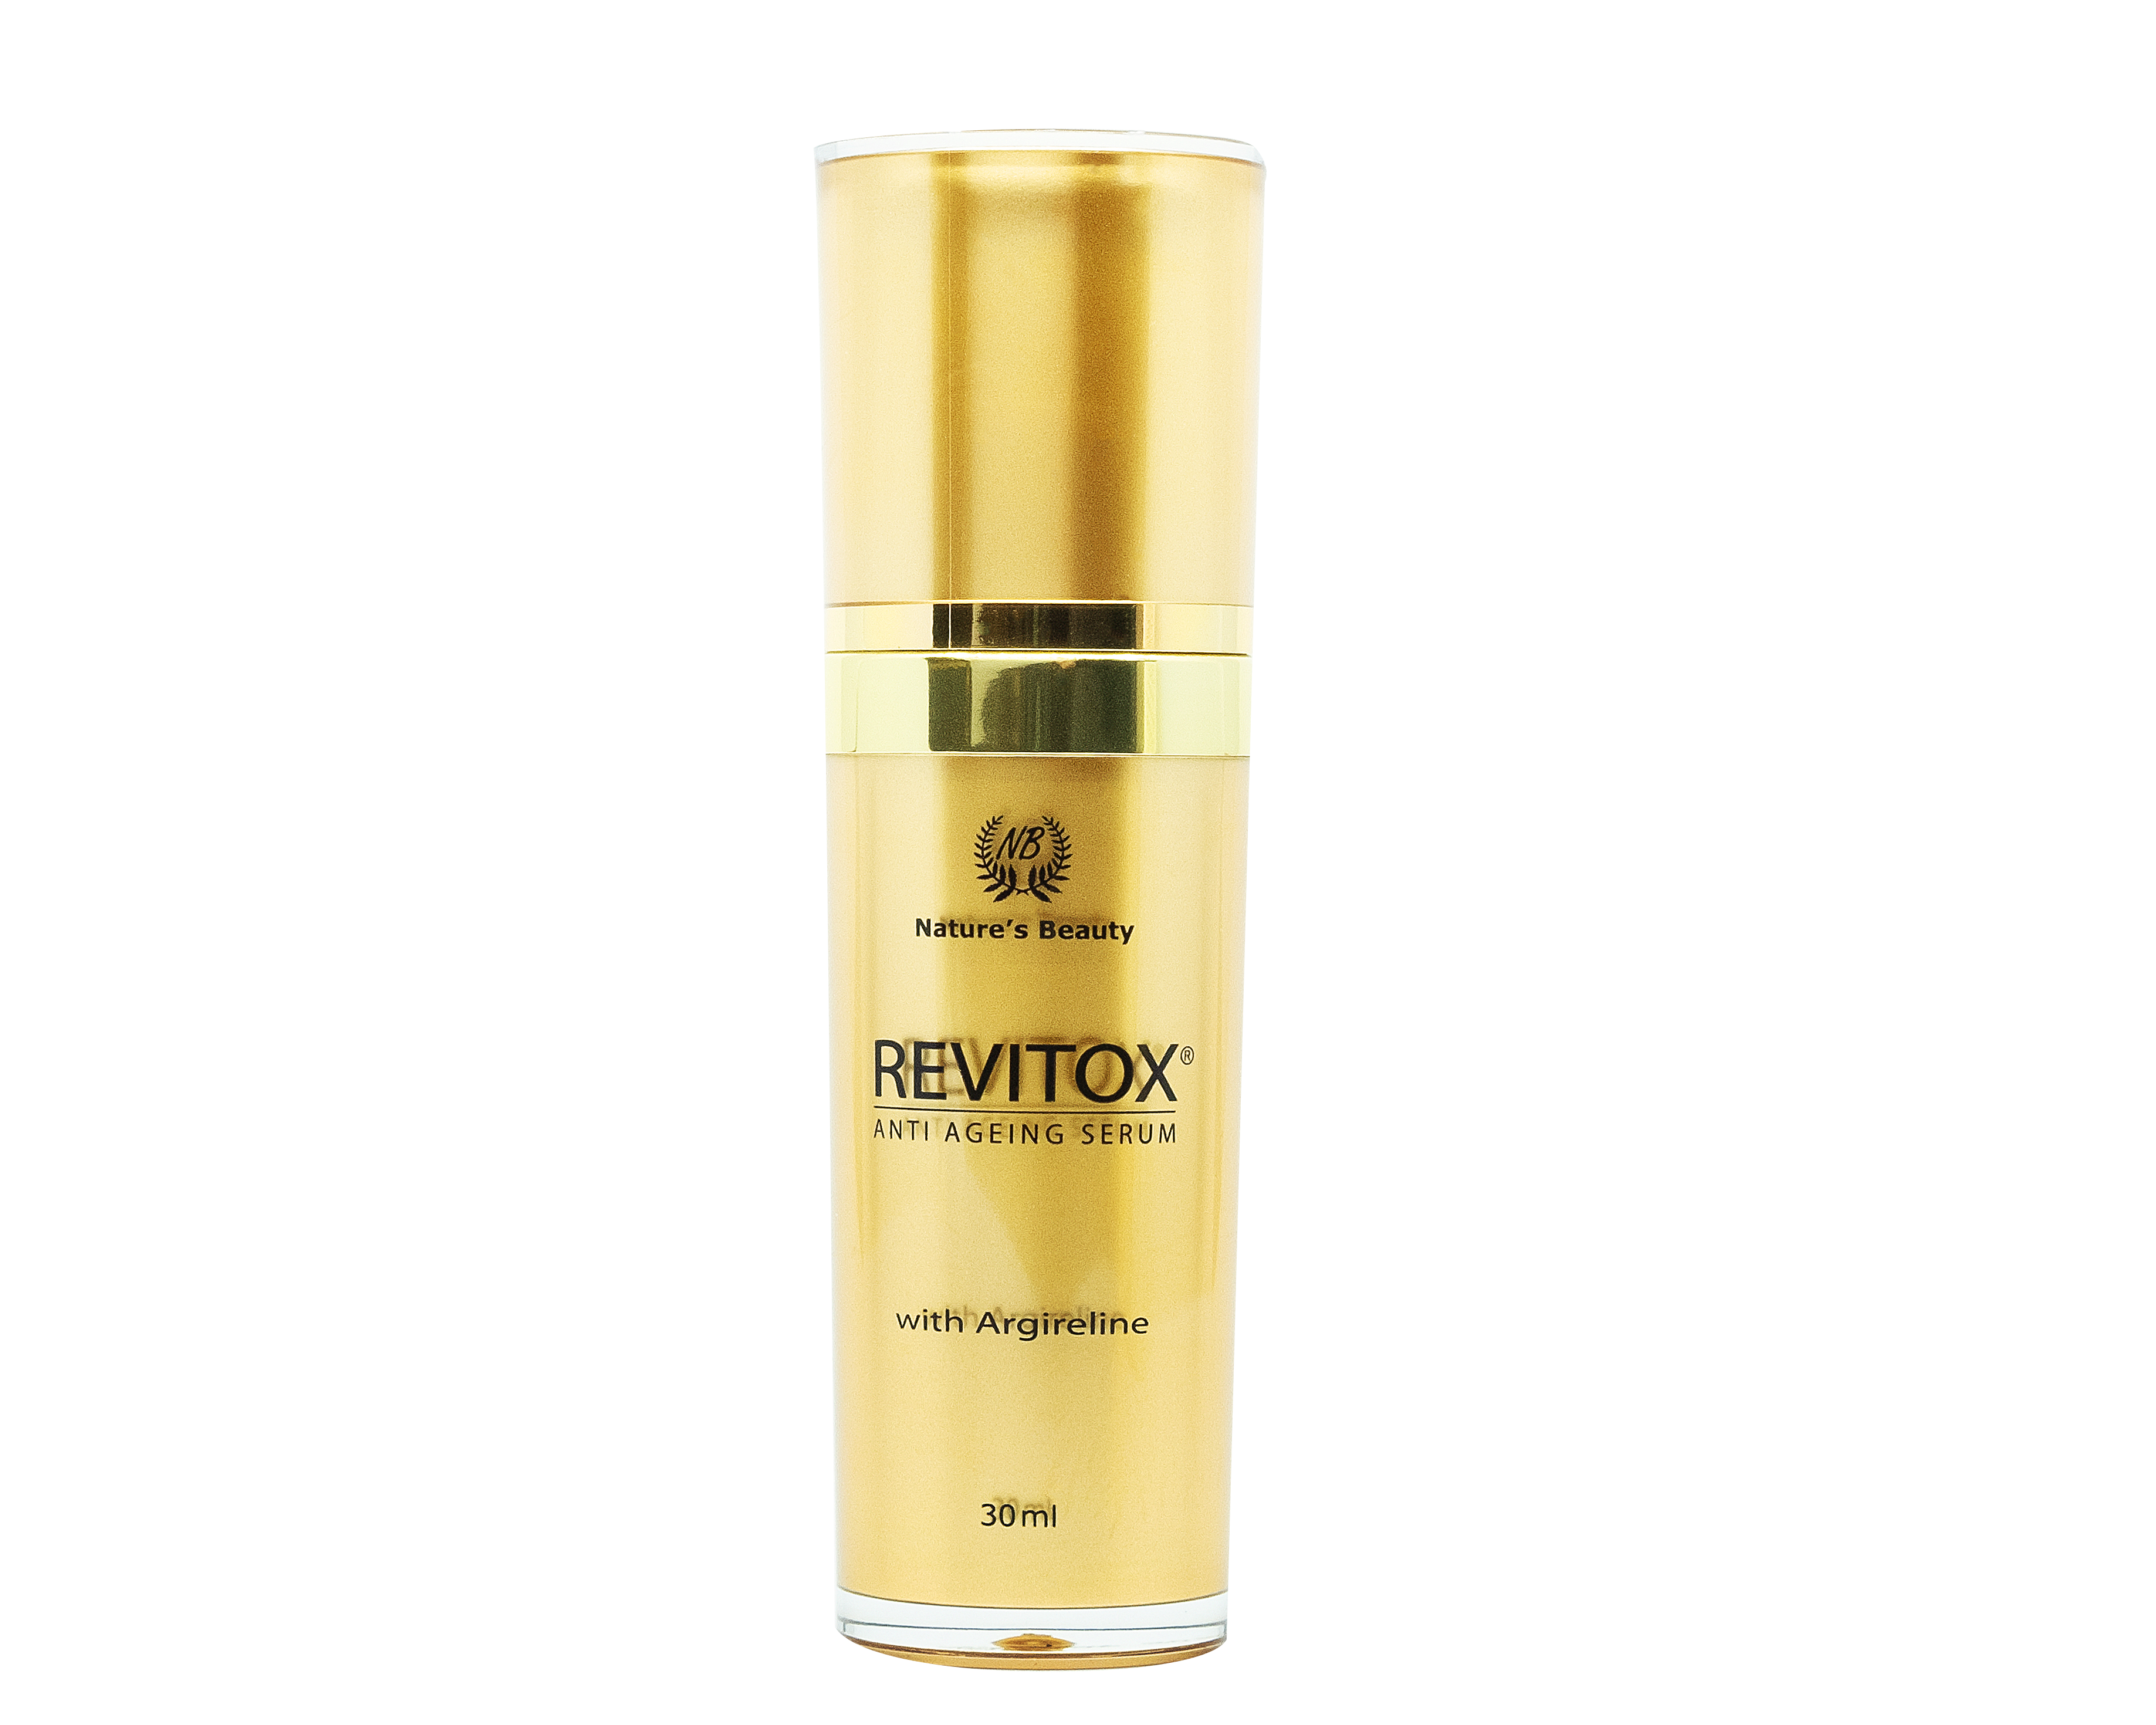 Nature's Beauty Revitox Anti Ageing Serum 30ml - 365 Health Limited